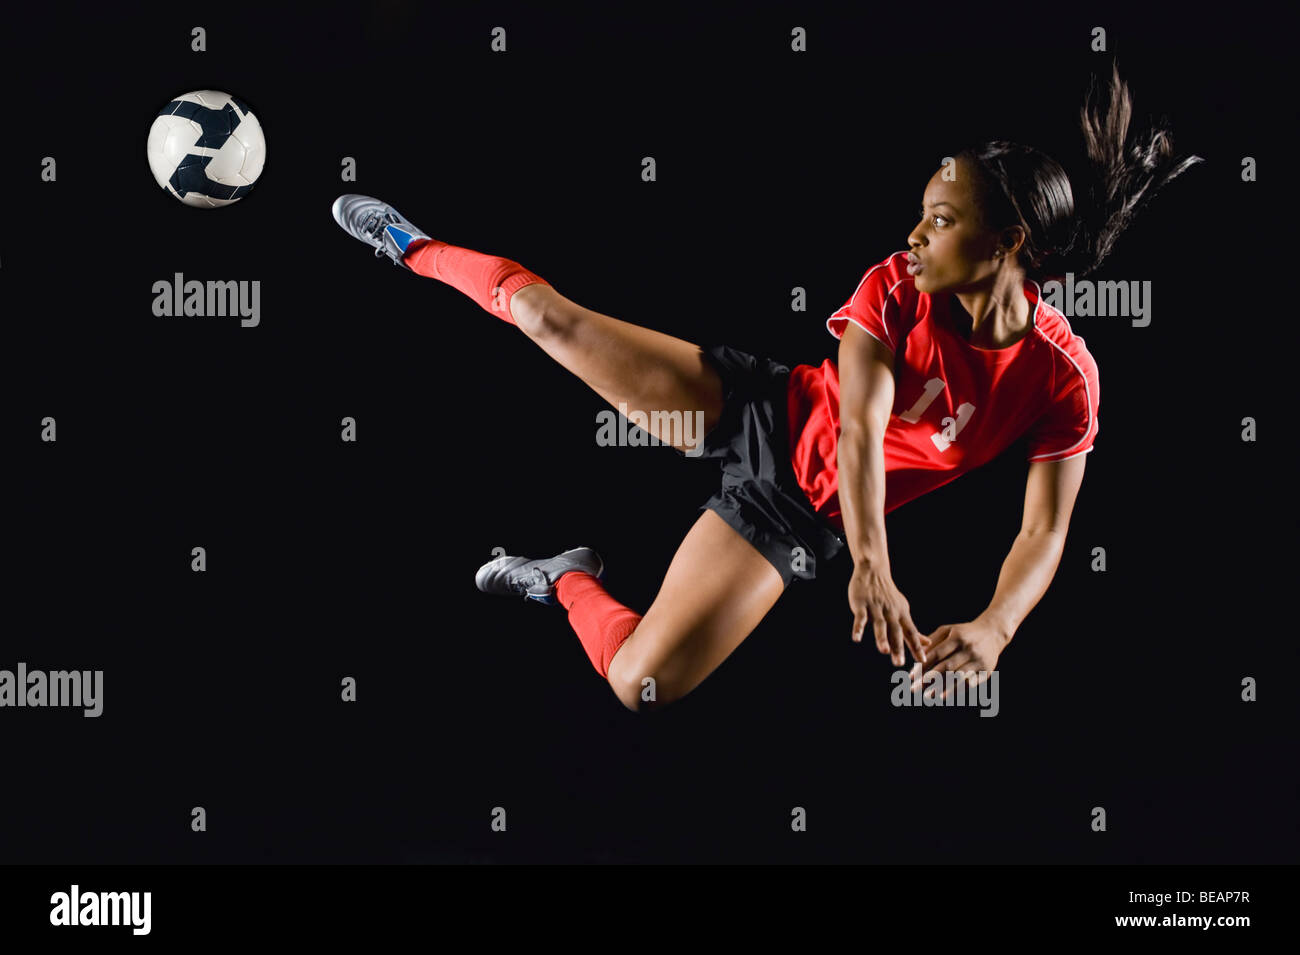 Mixed race soccer player kicking soccer ball in mid-air Stock Photo